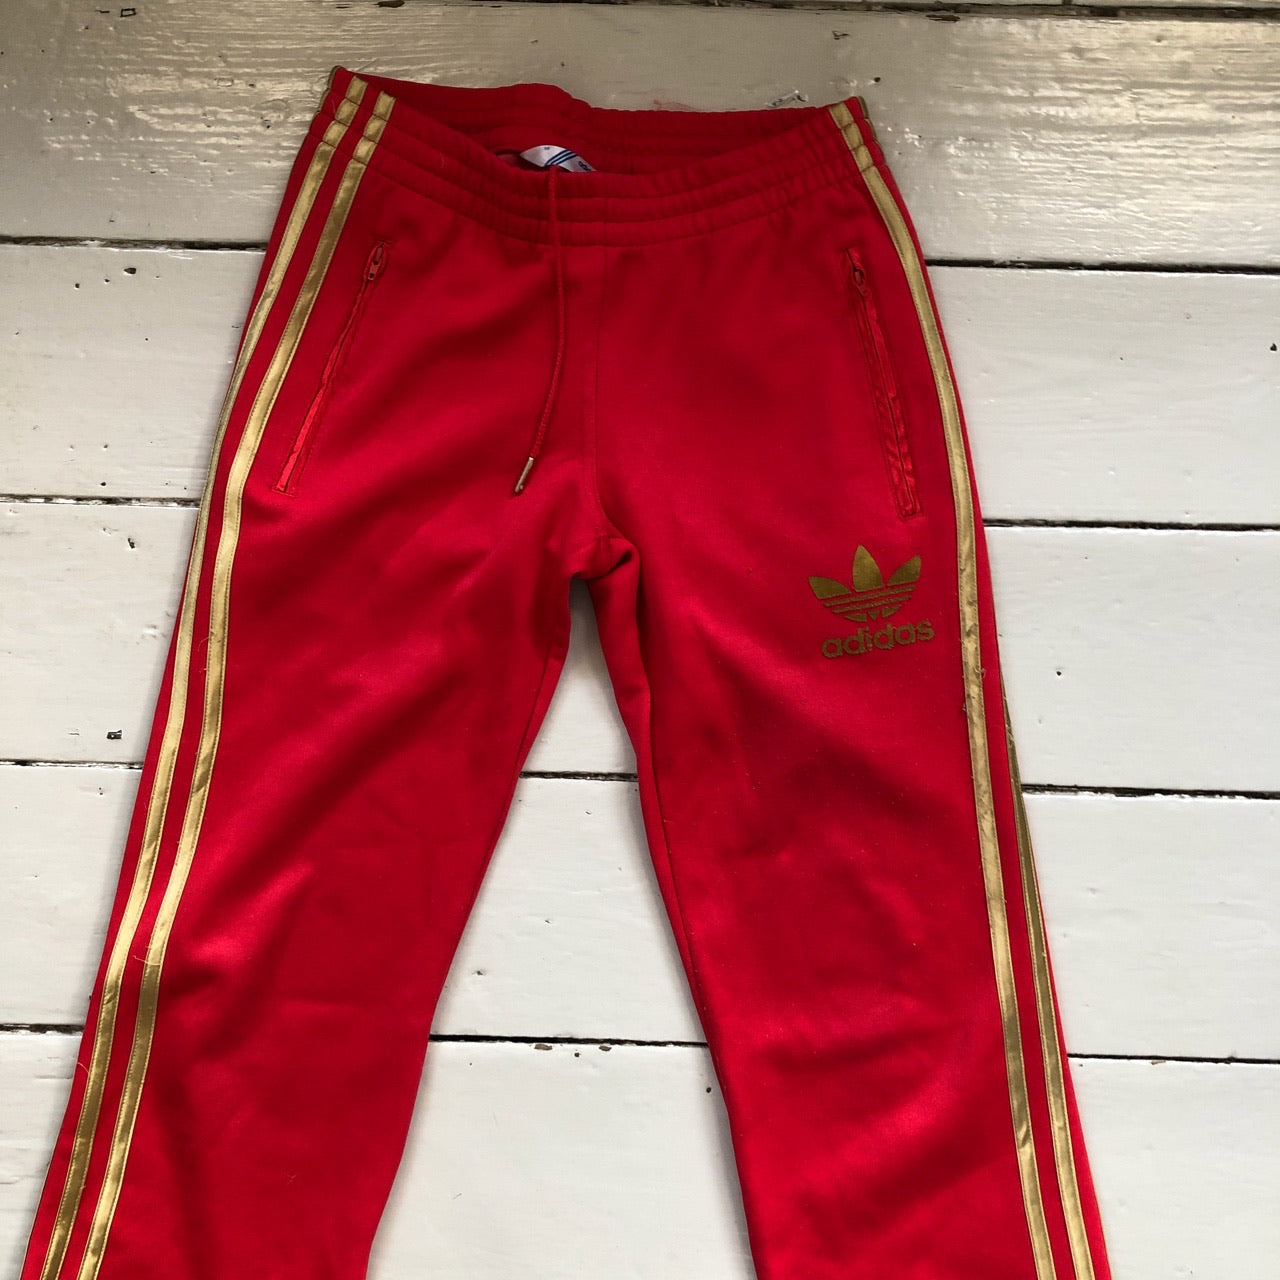 Adidas Red and Gold Bottoms (Size 10)